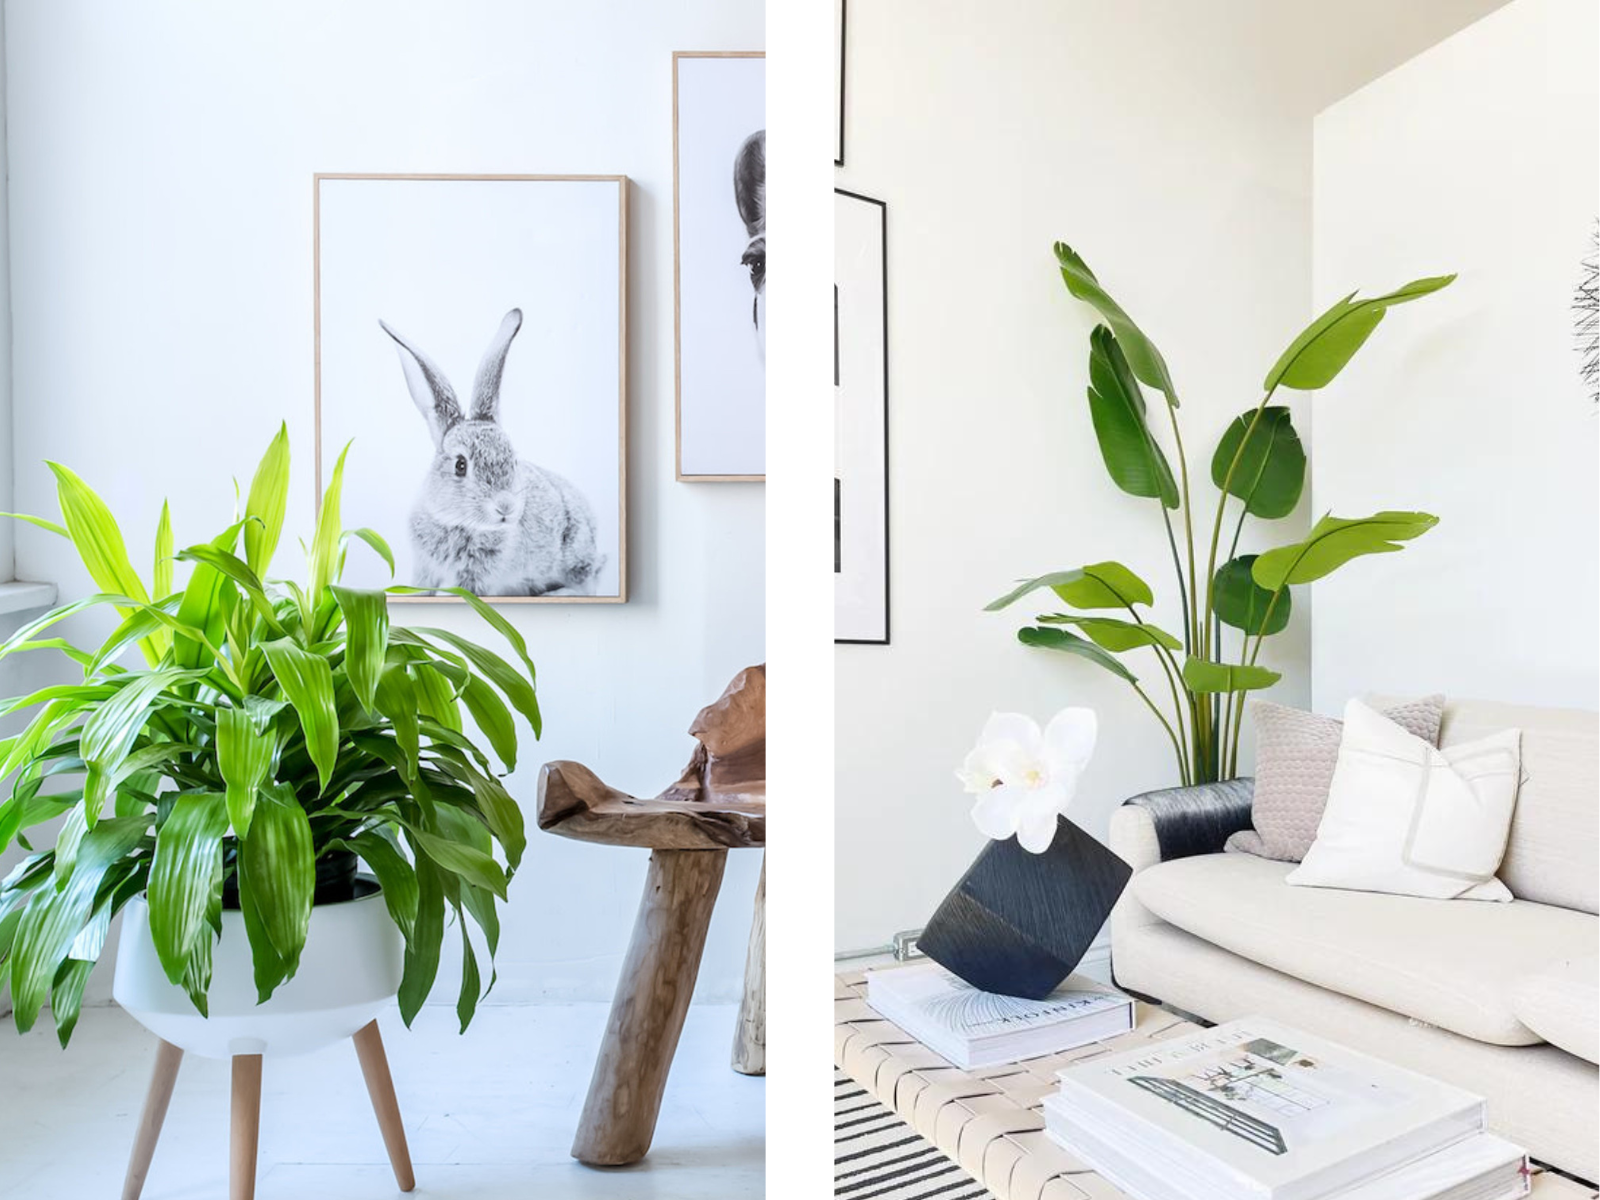 Decorating with Plants: The Guide - Details. | The Blog - Derrick Details